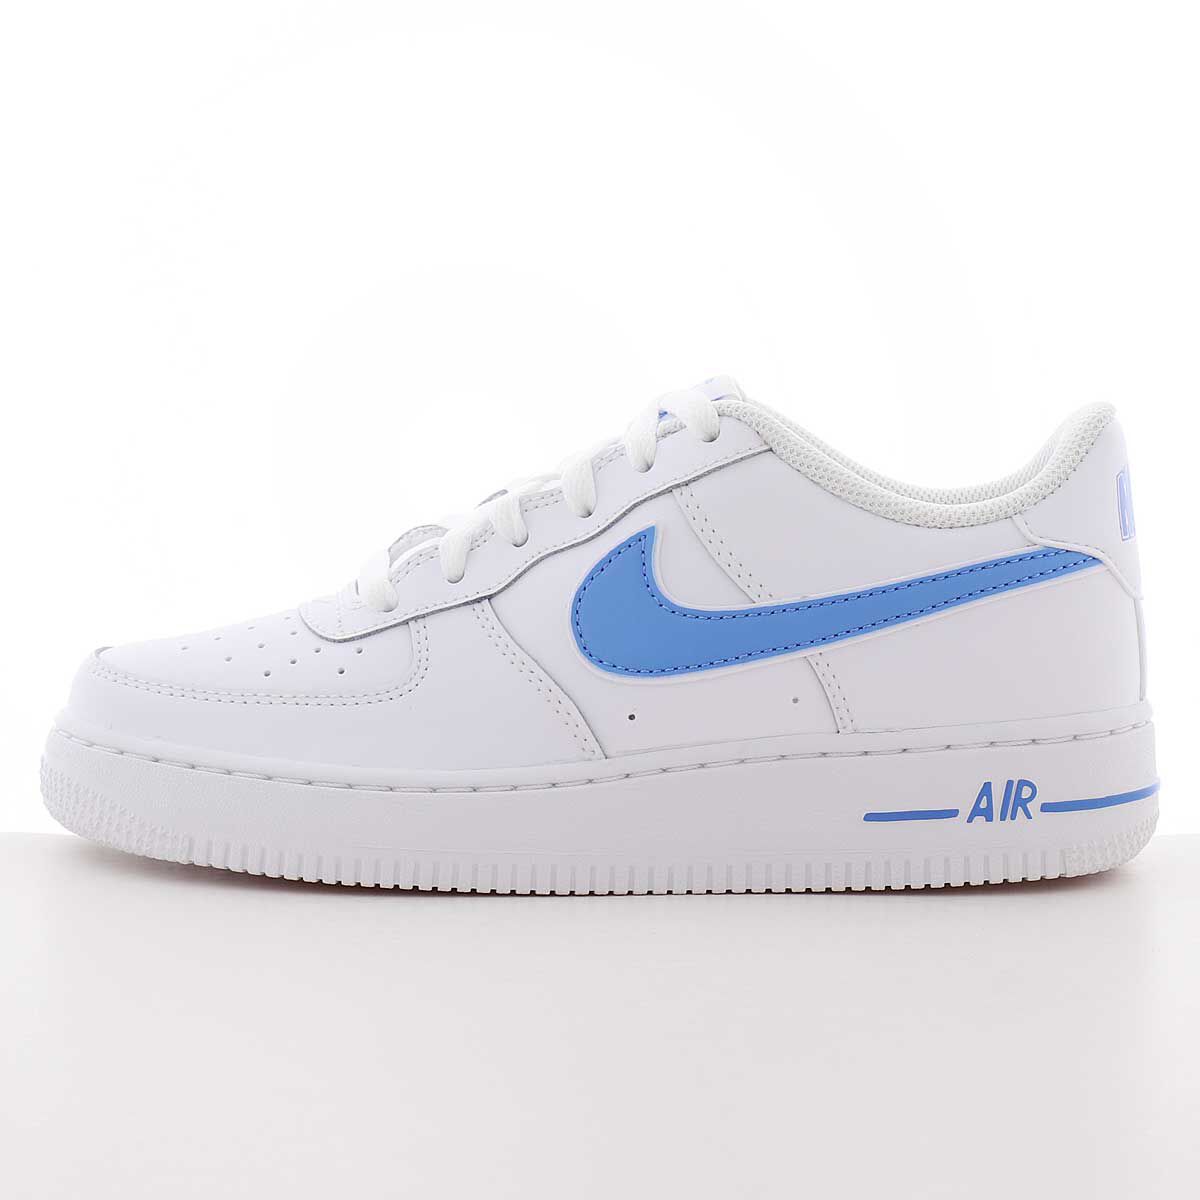 Buy AIR FORCE 1-3 (GS) for N/A 0.0 on 